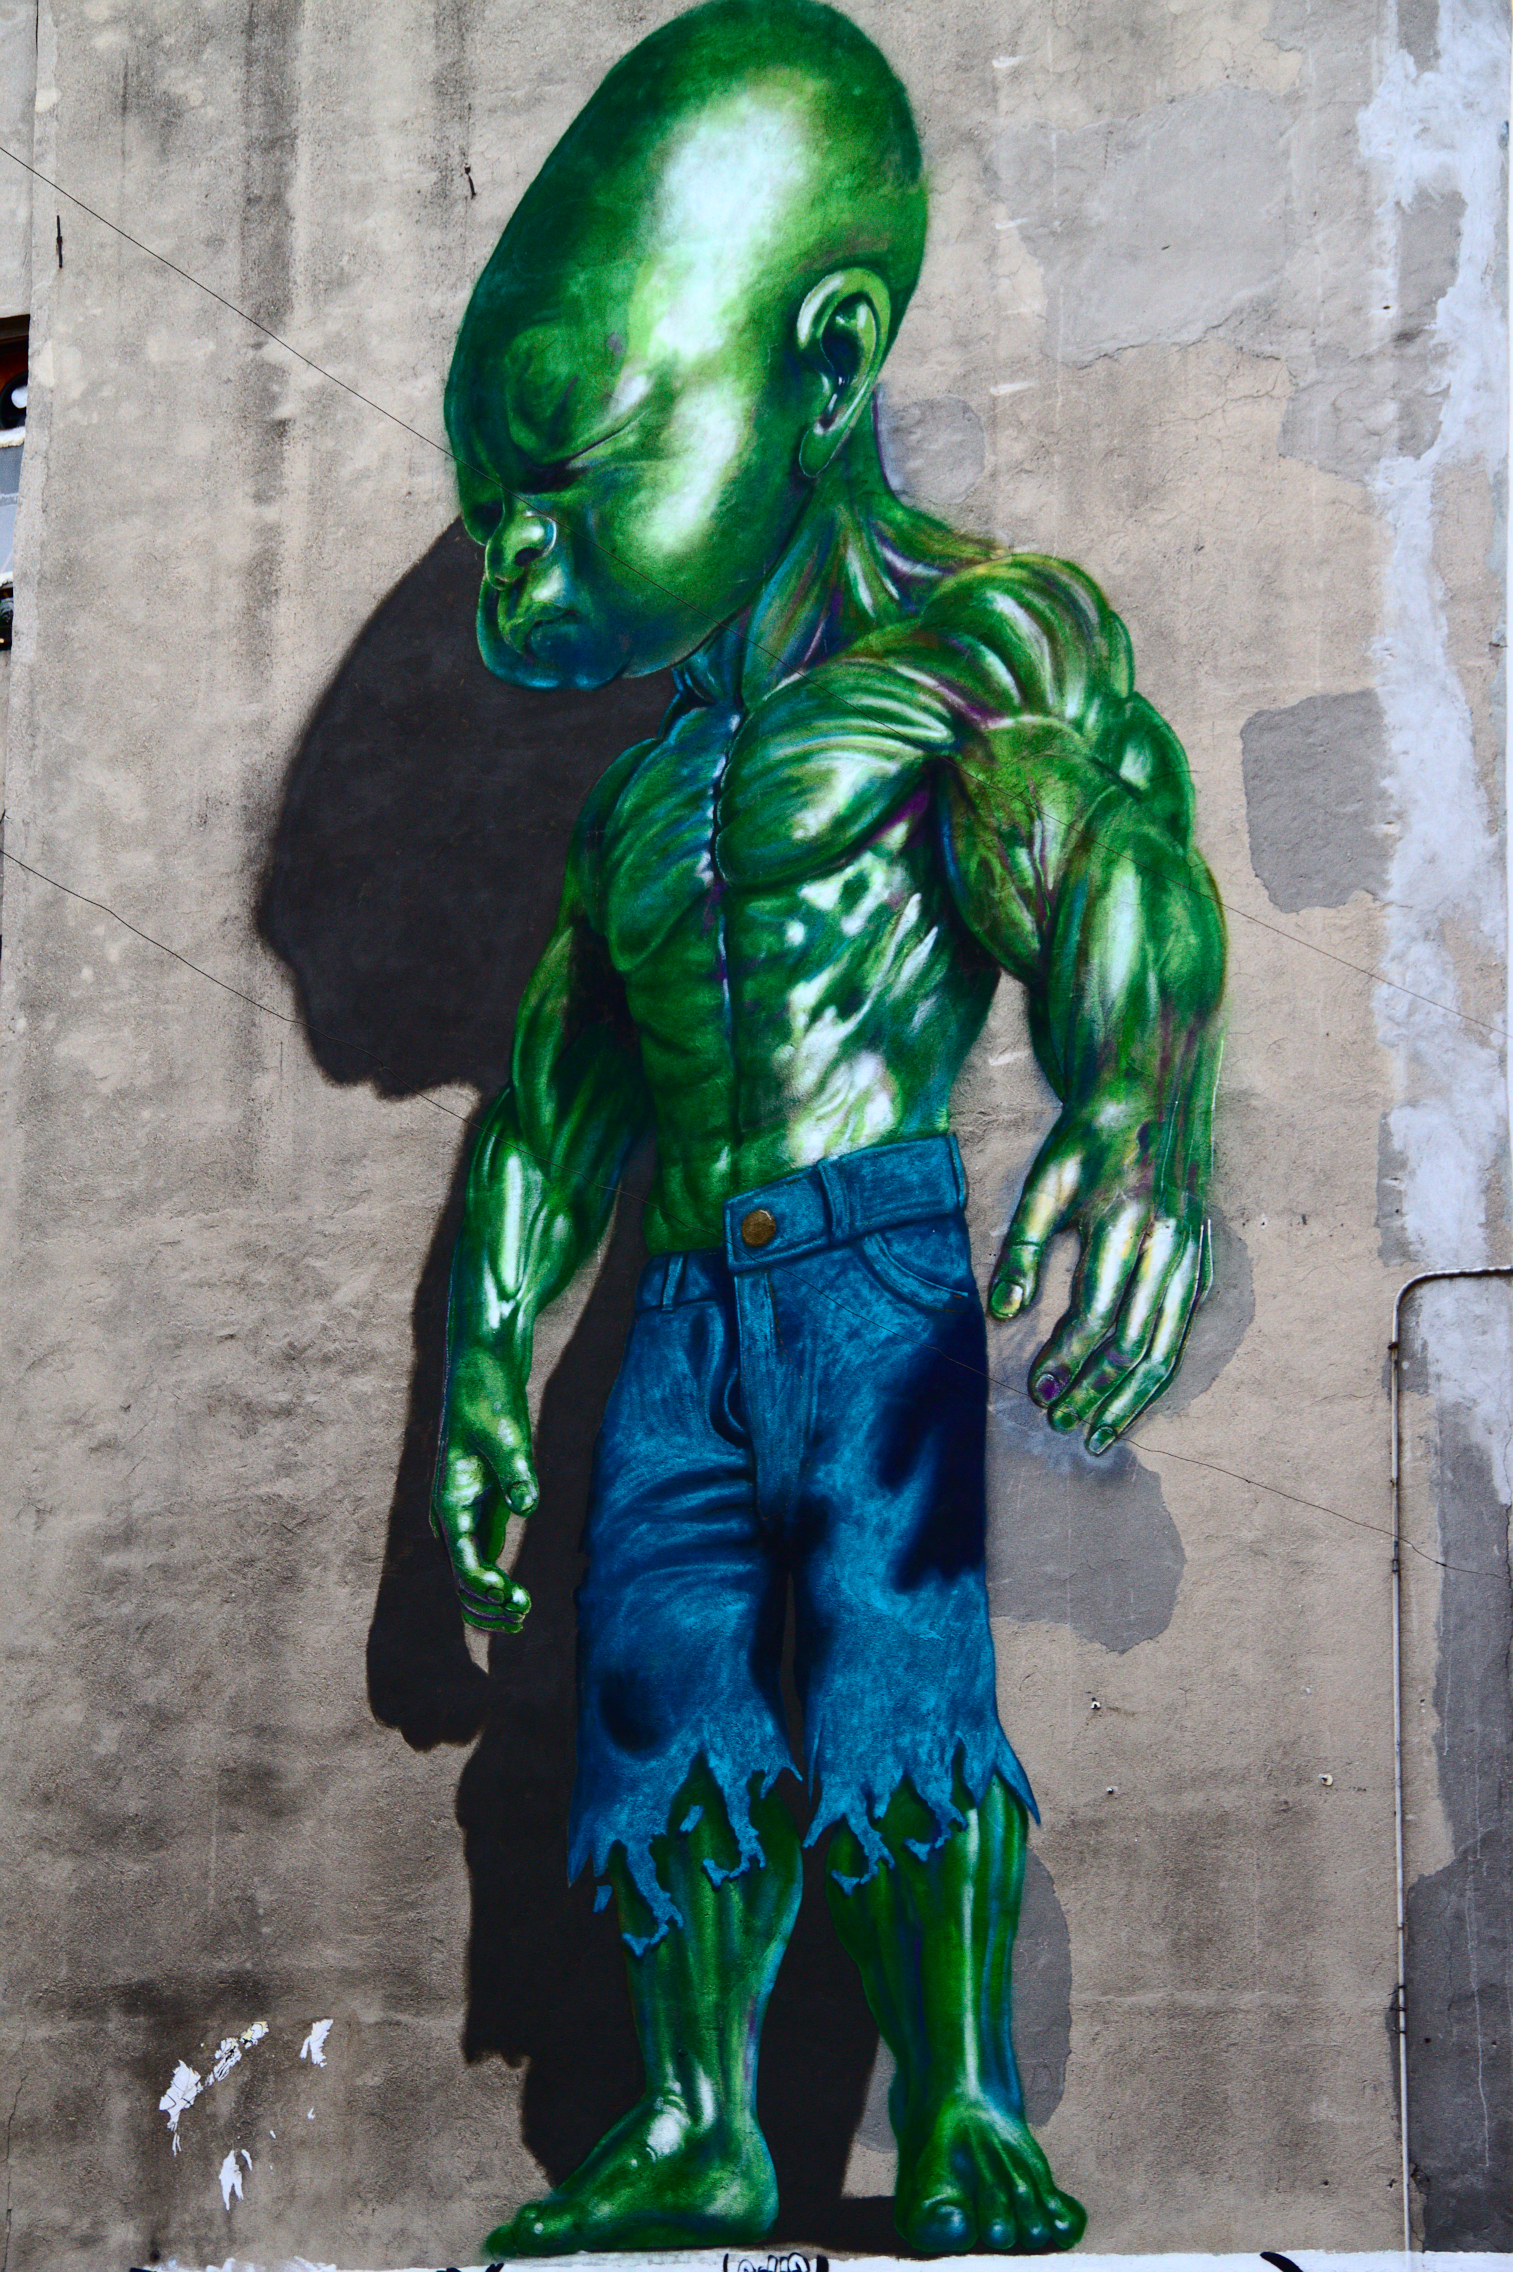 Image: Becoming the Hulk, 2014 from Ryan McKenna Apprentice Collection